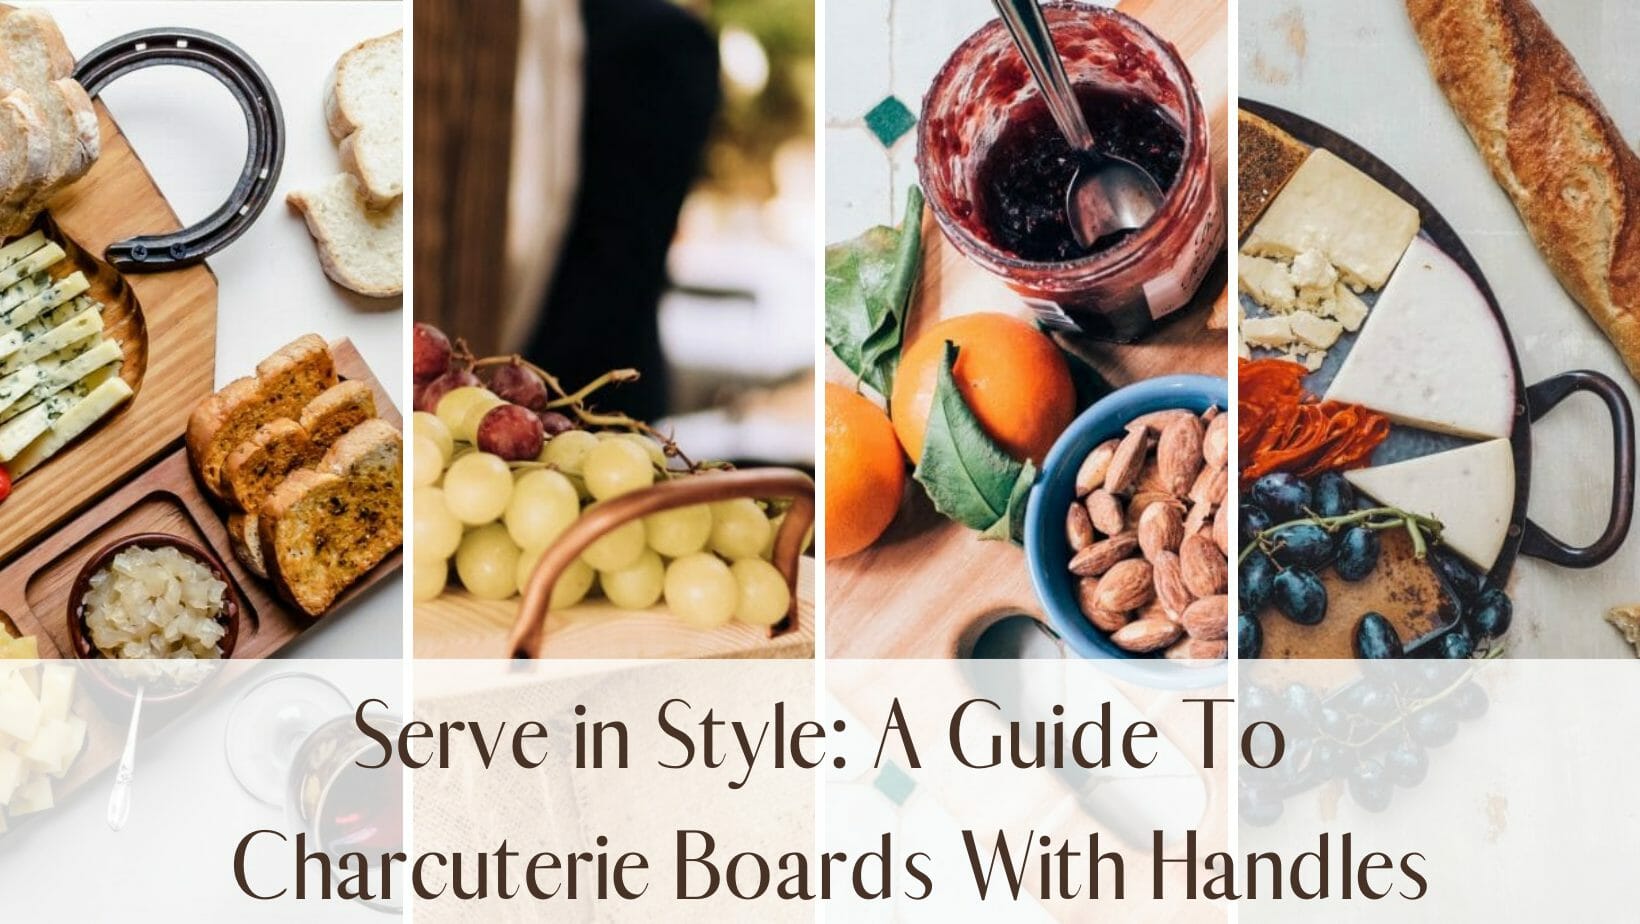 DIY Personalized Mini Charcuterie Boards (Using Food-Safe Paint!)